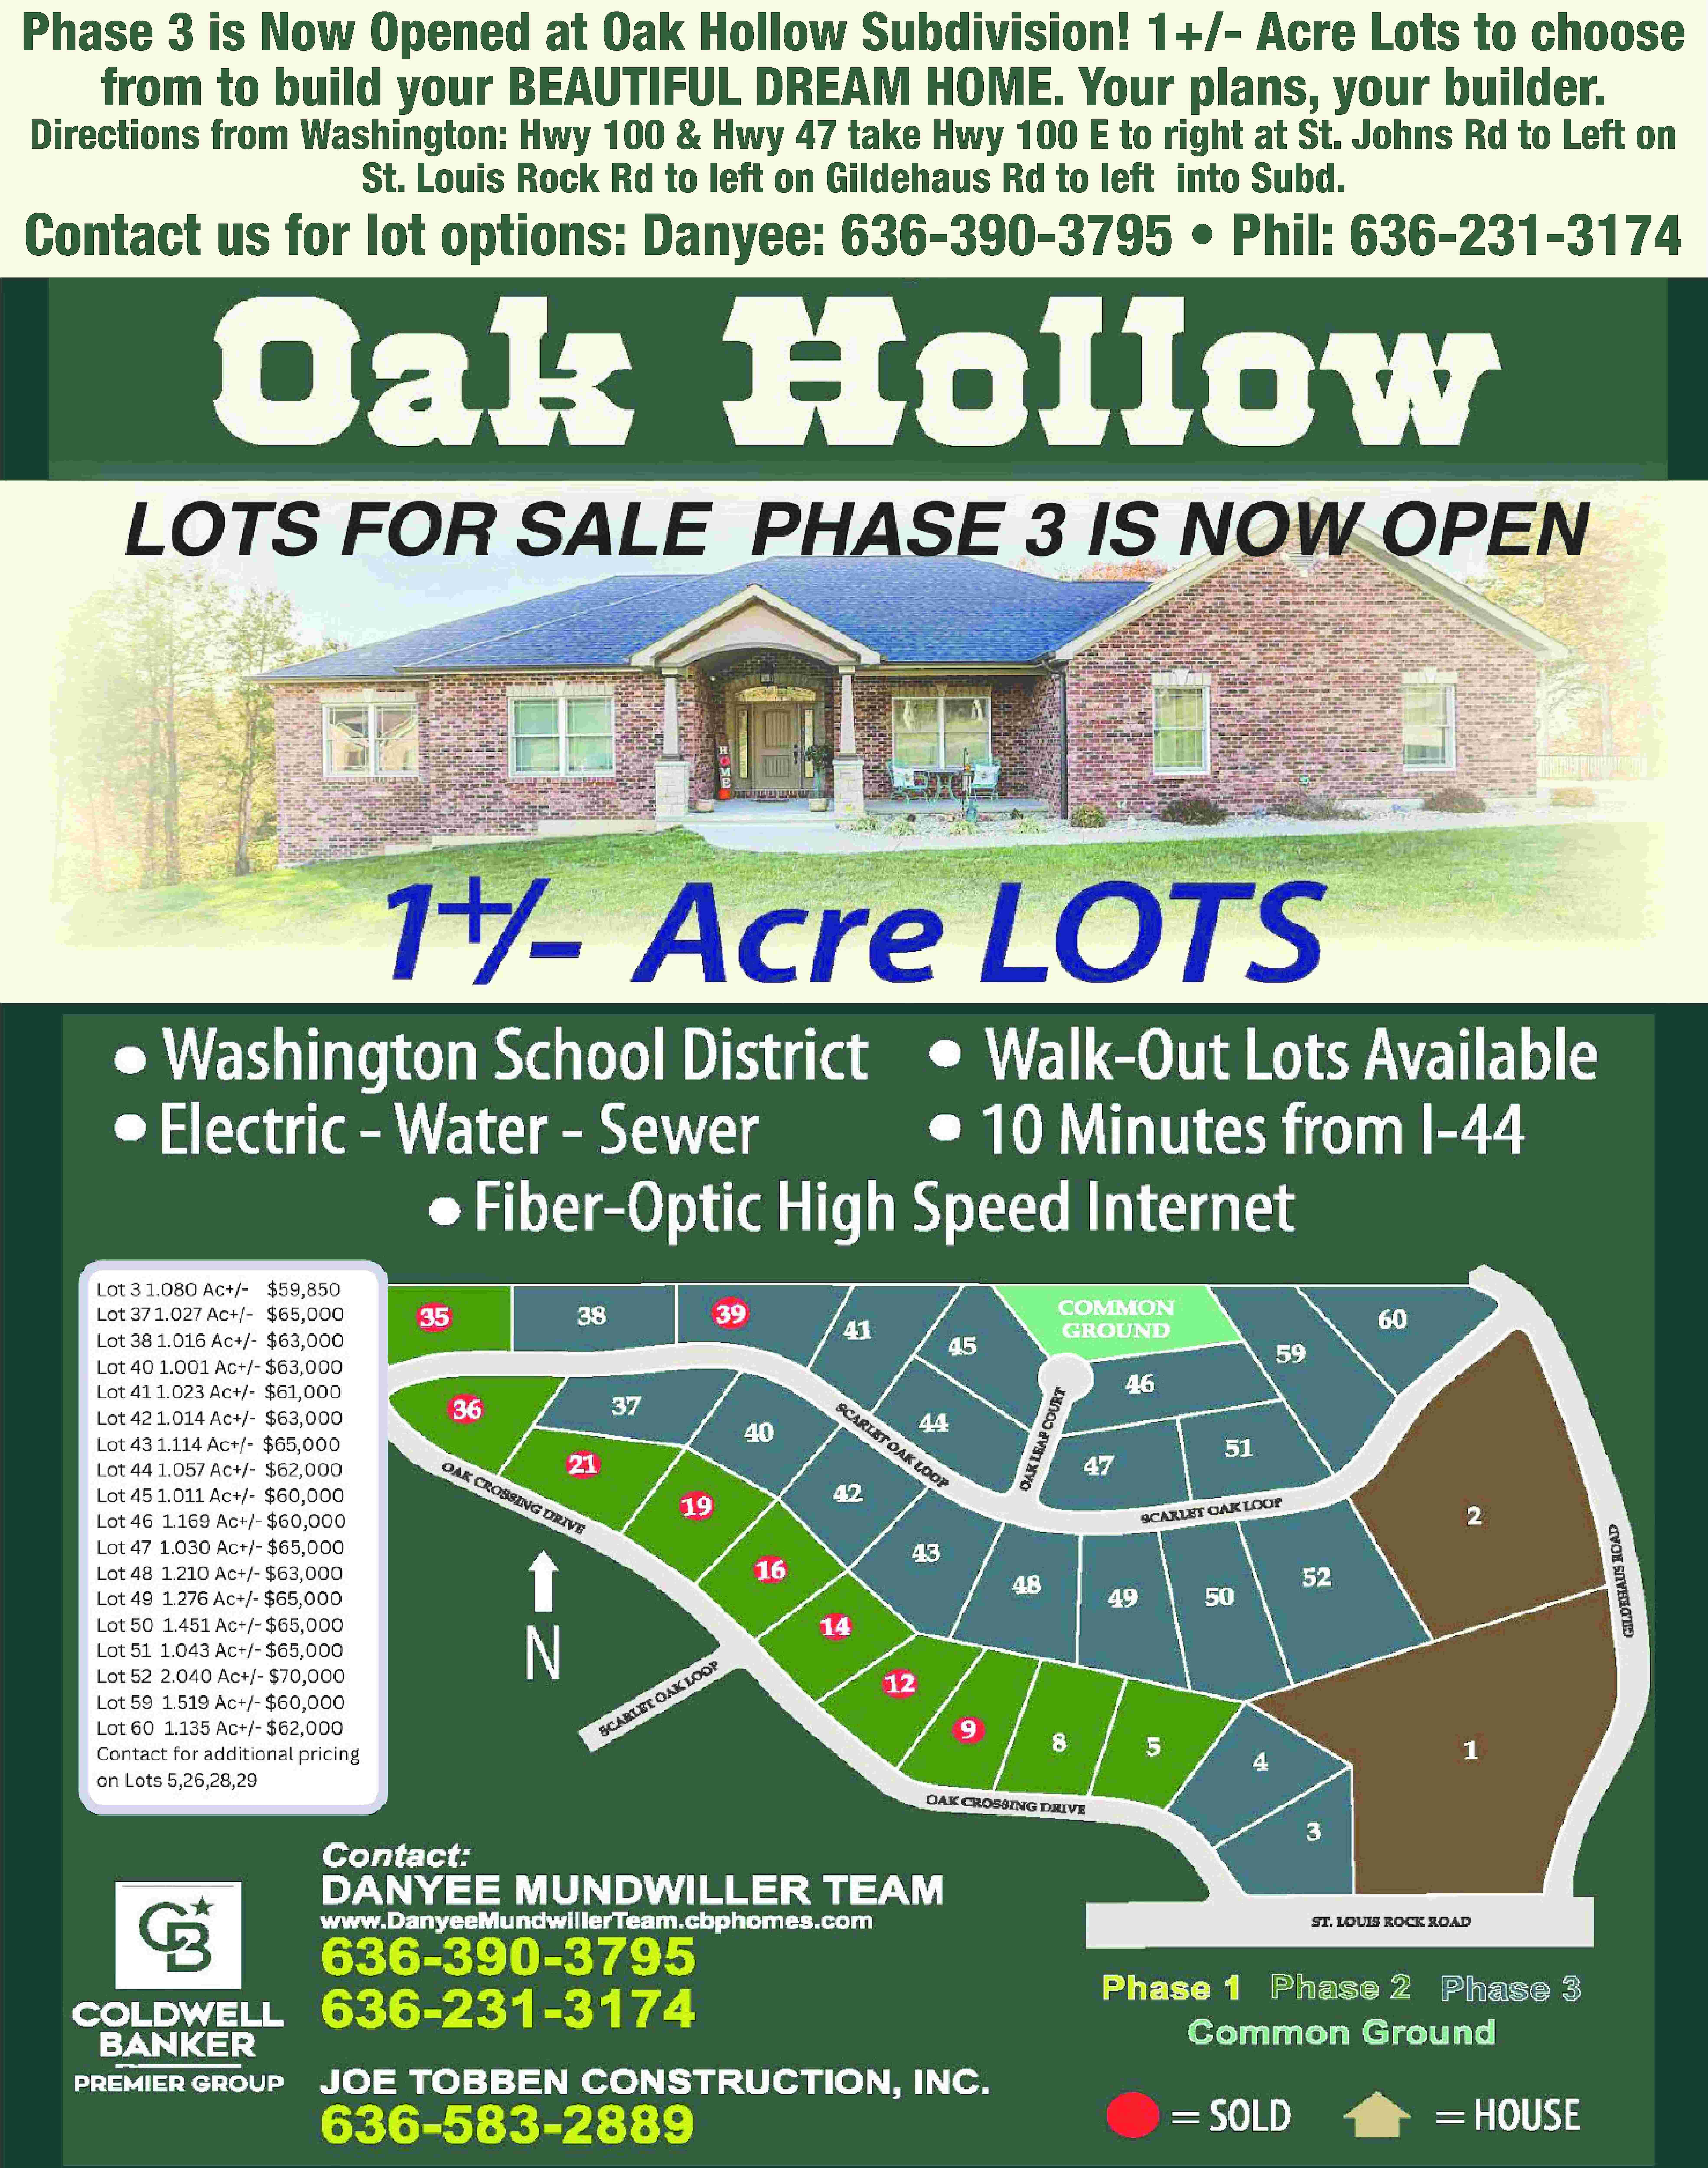 Phase 3 is Now Opened  Phase 3 is Now Opened at Oak Hollow Subdivision! 1+/- Acre Lots to choose from to build your BEAUTIFUL DREAM HOME. Your plans, your builder. Directions from Washington: Hwy 100 & Hwy 47 take Hwy 100 E to right at St. Johns Rd to Left on St. Louis Rock Rd to left on Gildehaus Rd to left into Subd. Contact us for lot options: Danyee: 636-390-3795 • Phil: 636-231-3174